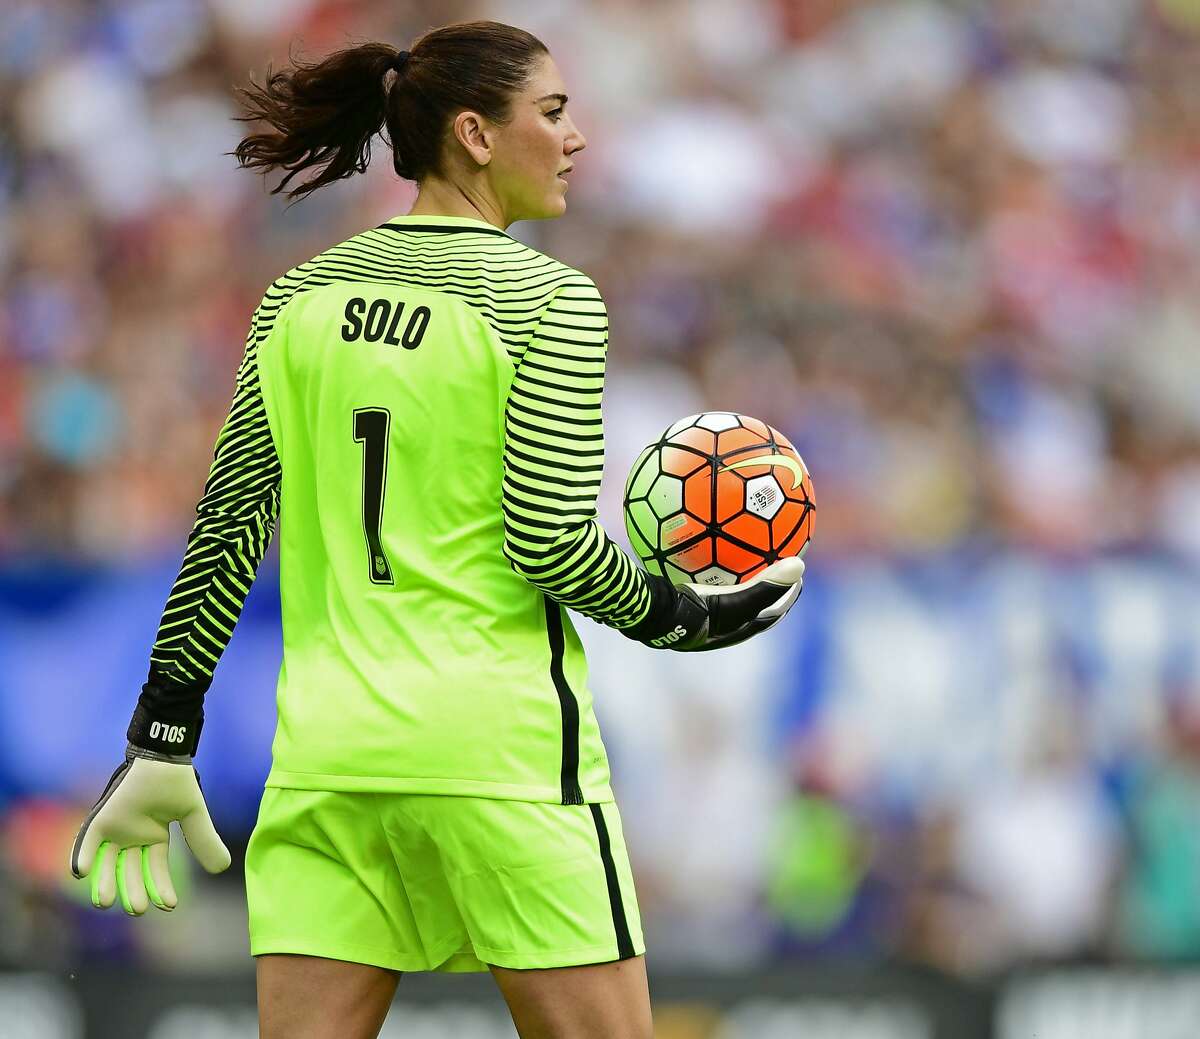 United States goal keeper Hope Solo holds the ball after a stop during the second half of an international friendly soccer match against Japan, Sunday, June 5, 2016, in Cleveland, Ohio. (AP Photo/David Dermer)